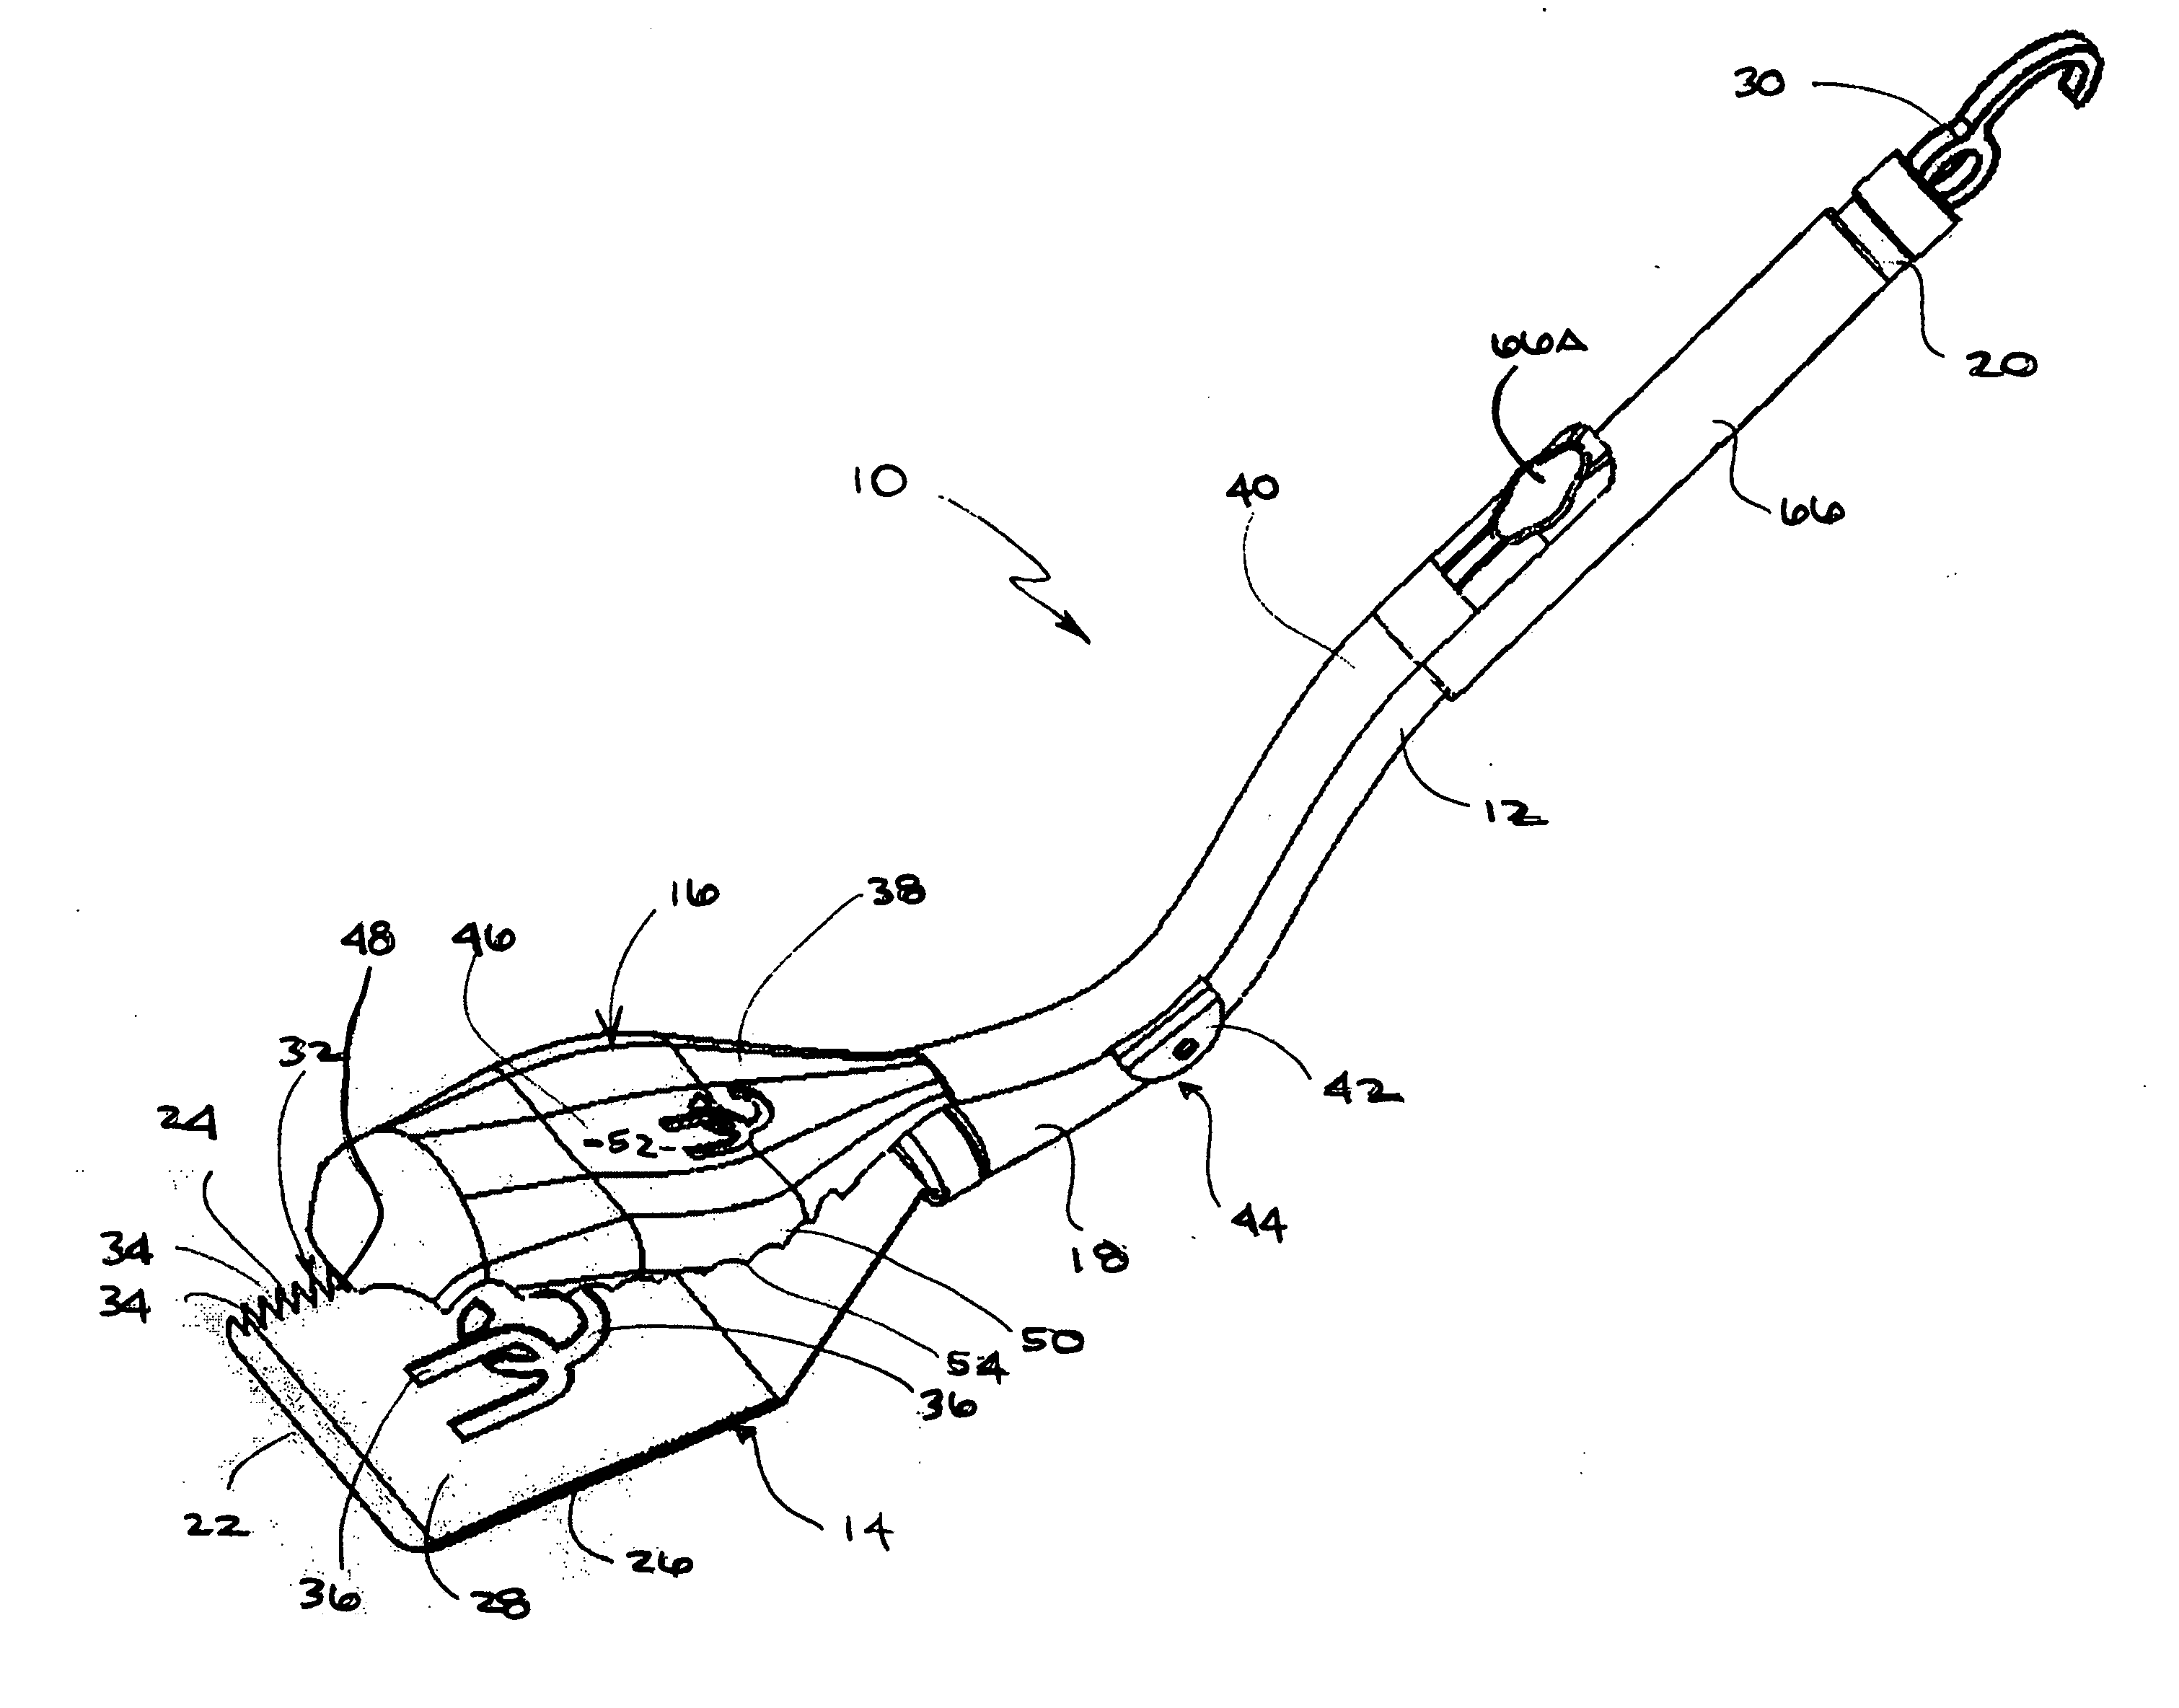 Combination spatula and tong device for handling food